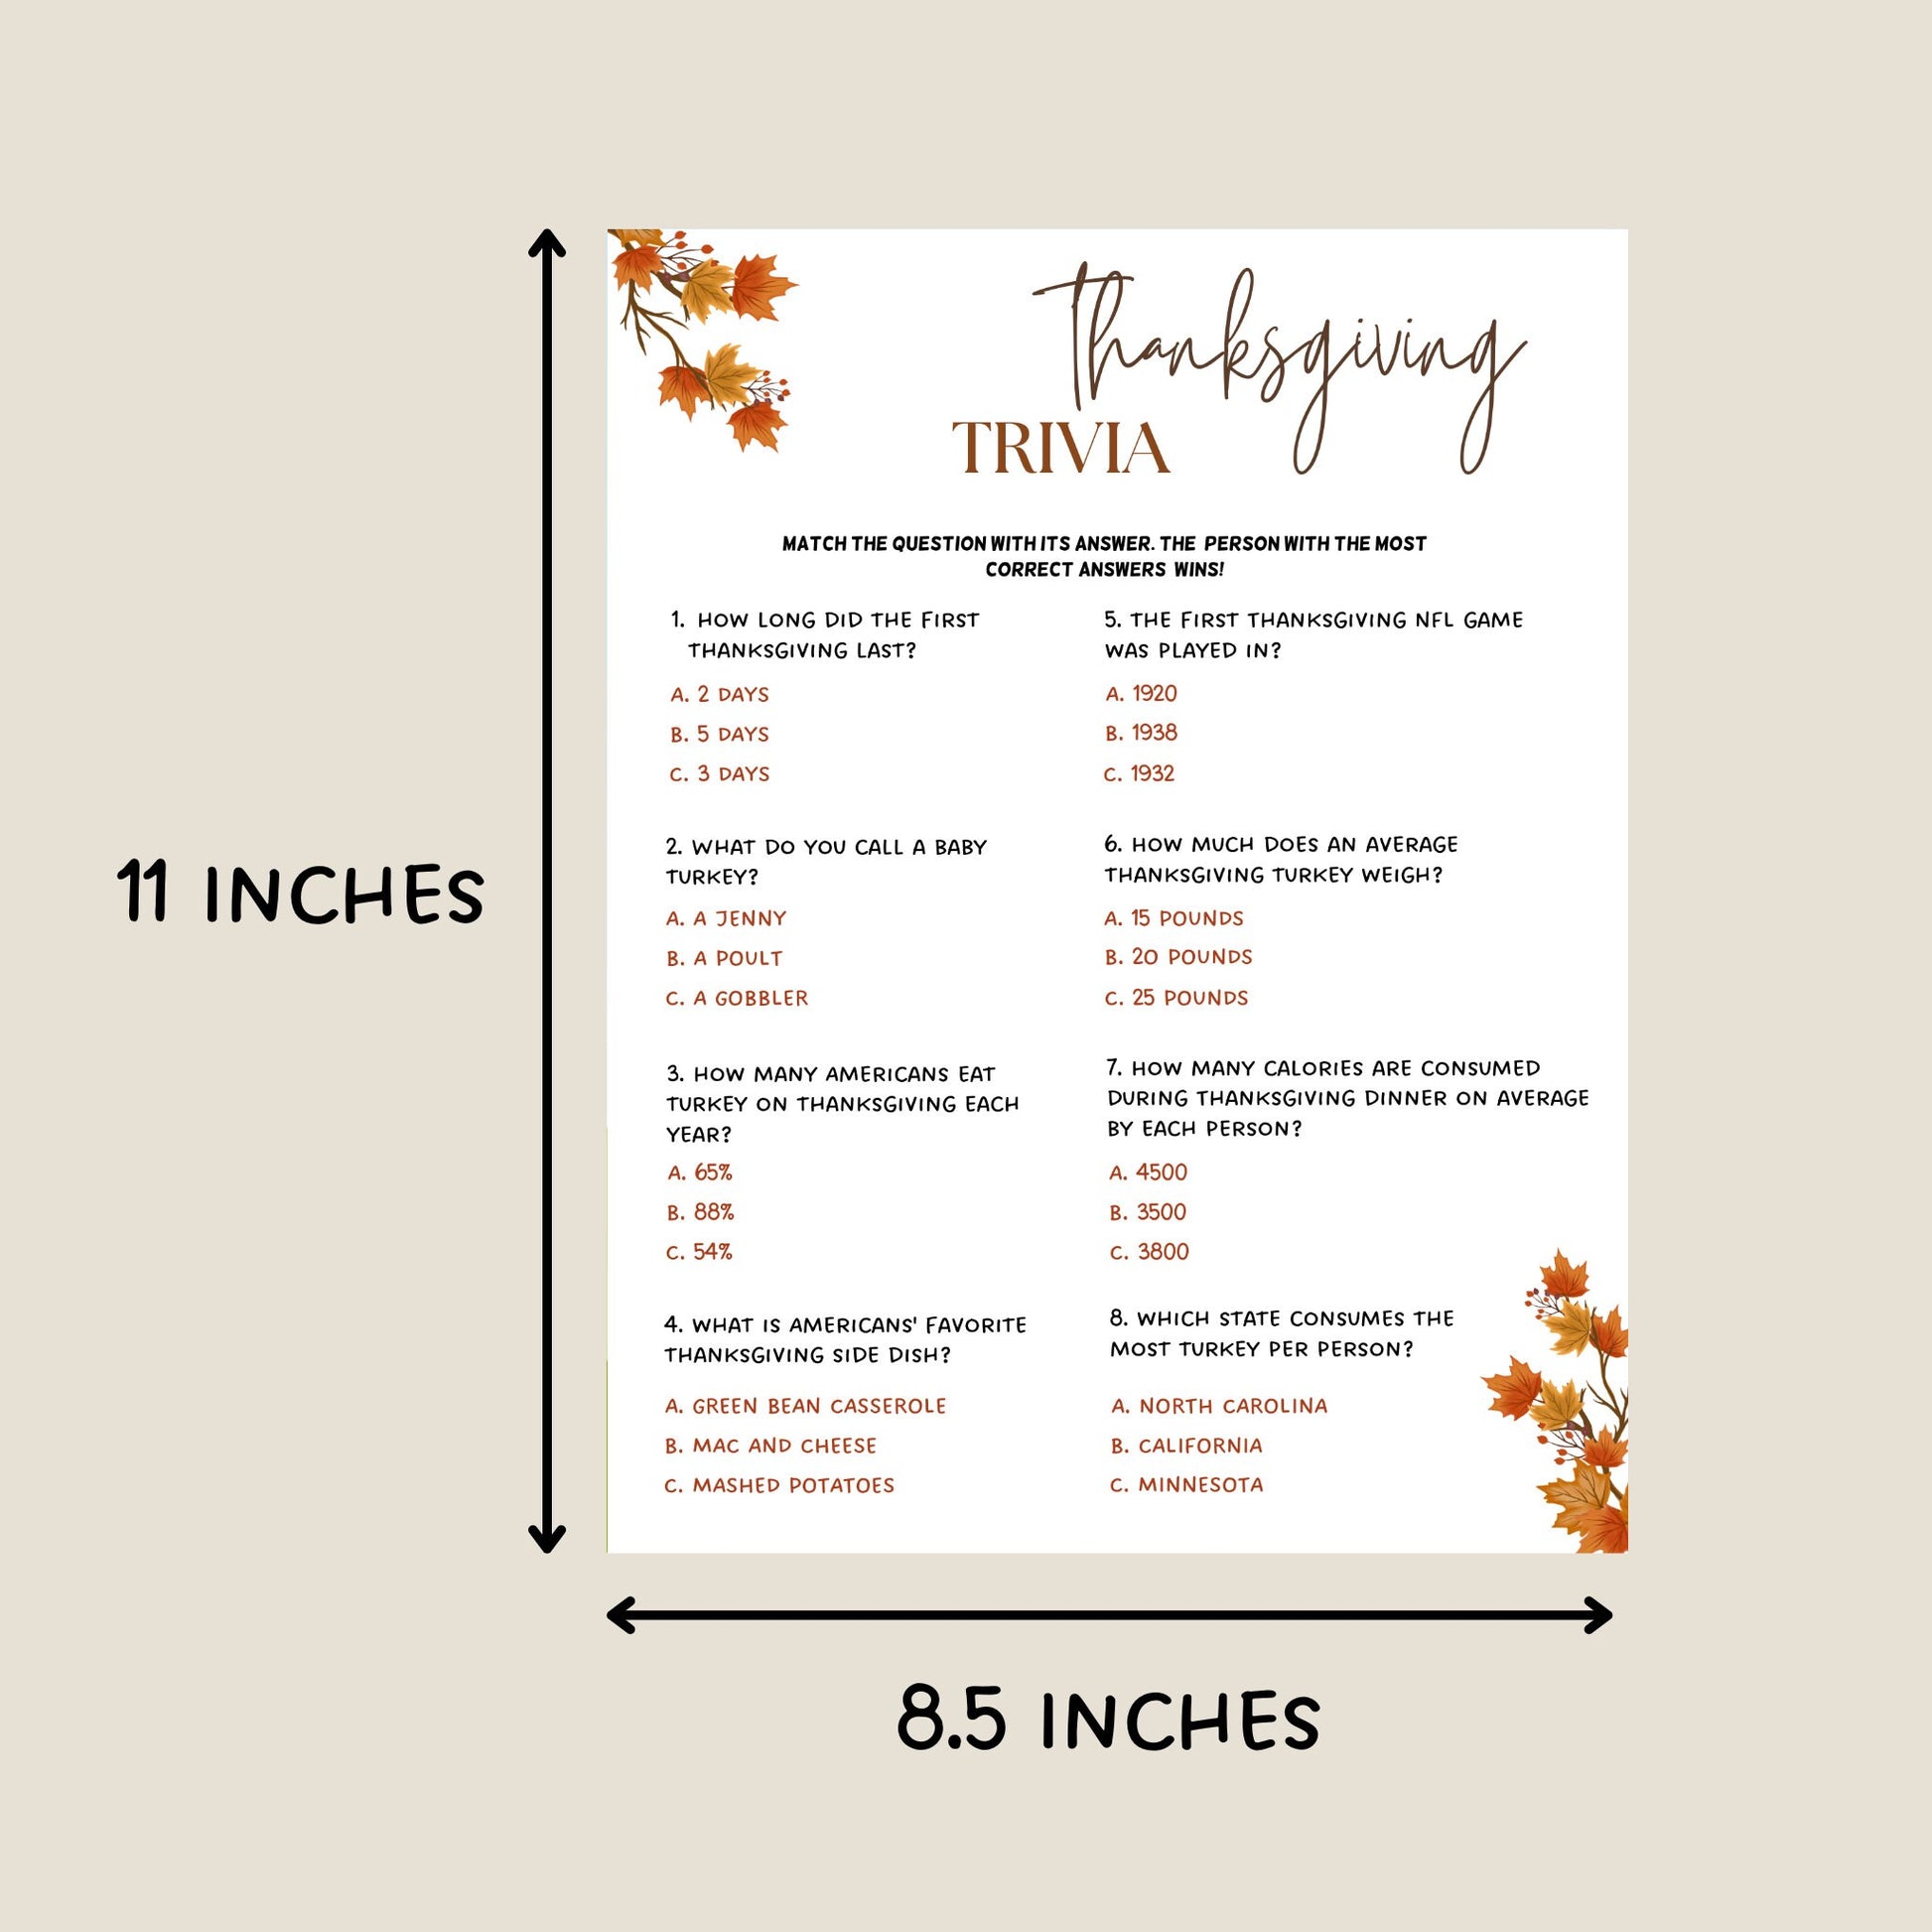 Thanksgiving Trivia Game Printable, Fun Friendsgiving Game, Turkey Day, Fall Holiday Family Activity, Office Work Party Game, Classroom Game